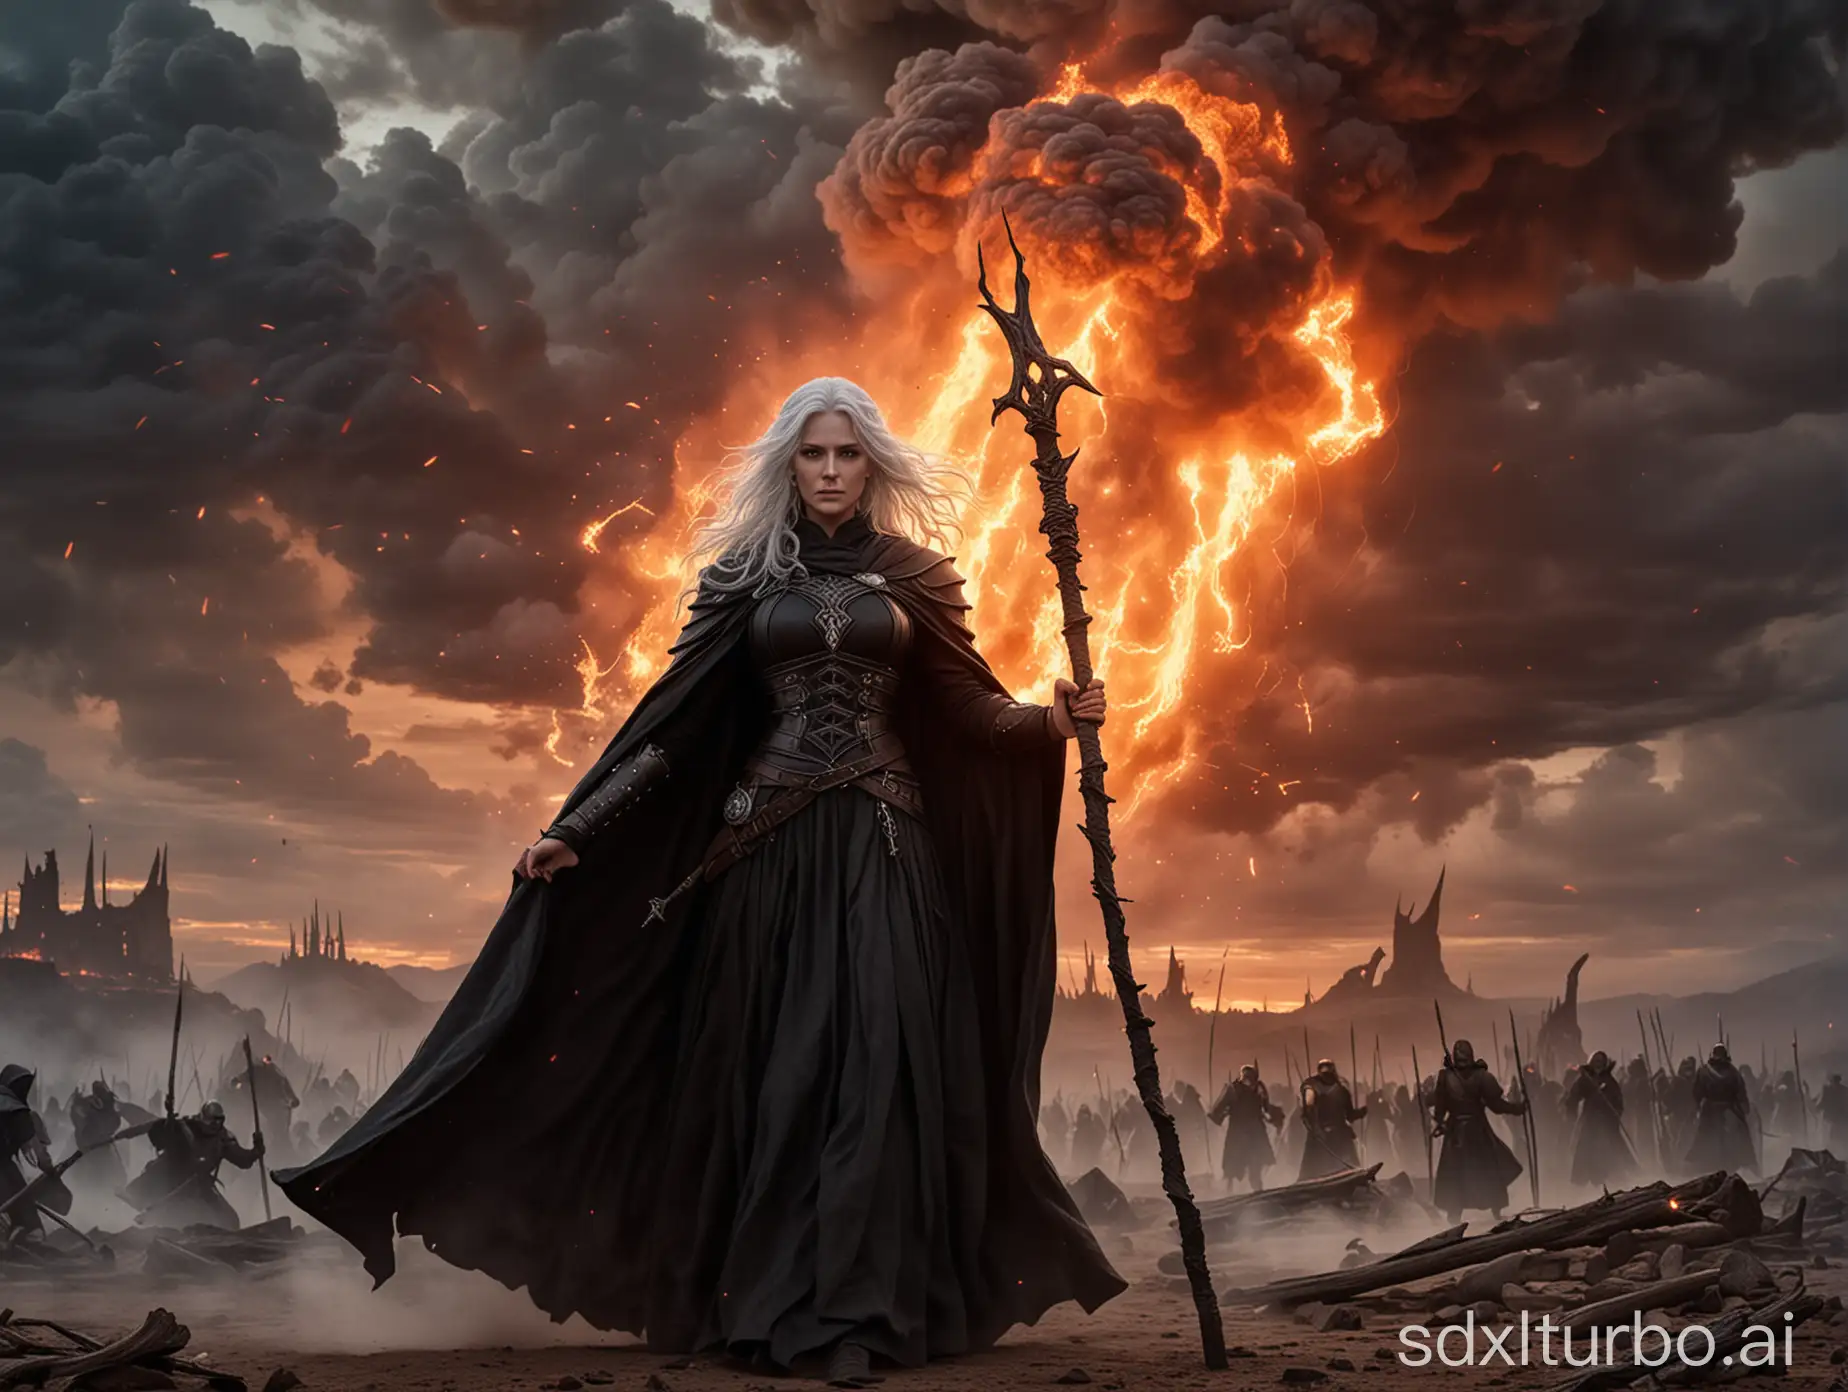 In a desolate battlefield, a white-haired witch in a long black robe is holding her ancient staff high, casting a powerful spell. Her eyes are firm and profound, as a dazzling beam of magical energy shoots from the staff, striking the villain on the opposite side. The villain, clad in black armor, is taken aback by the sudden force and falls backward, with cracks in the armor revealing the severity of the impact. The sky above is roiling with blood-red clouds, foreboding an ominous sign, while the surroundings of the battlefield are filled with intertwining flames and smoke, adding a dramatic effect to this clash between good and evil.